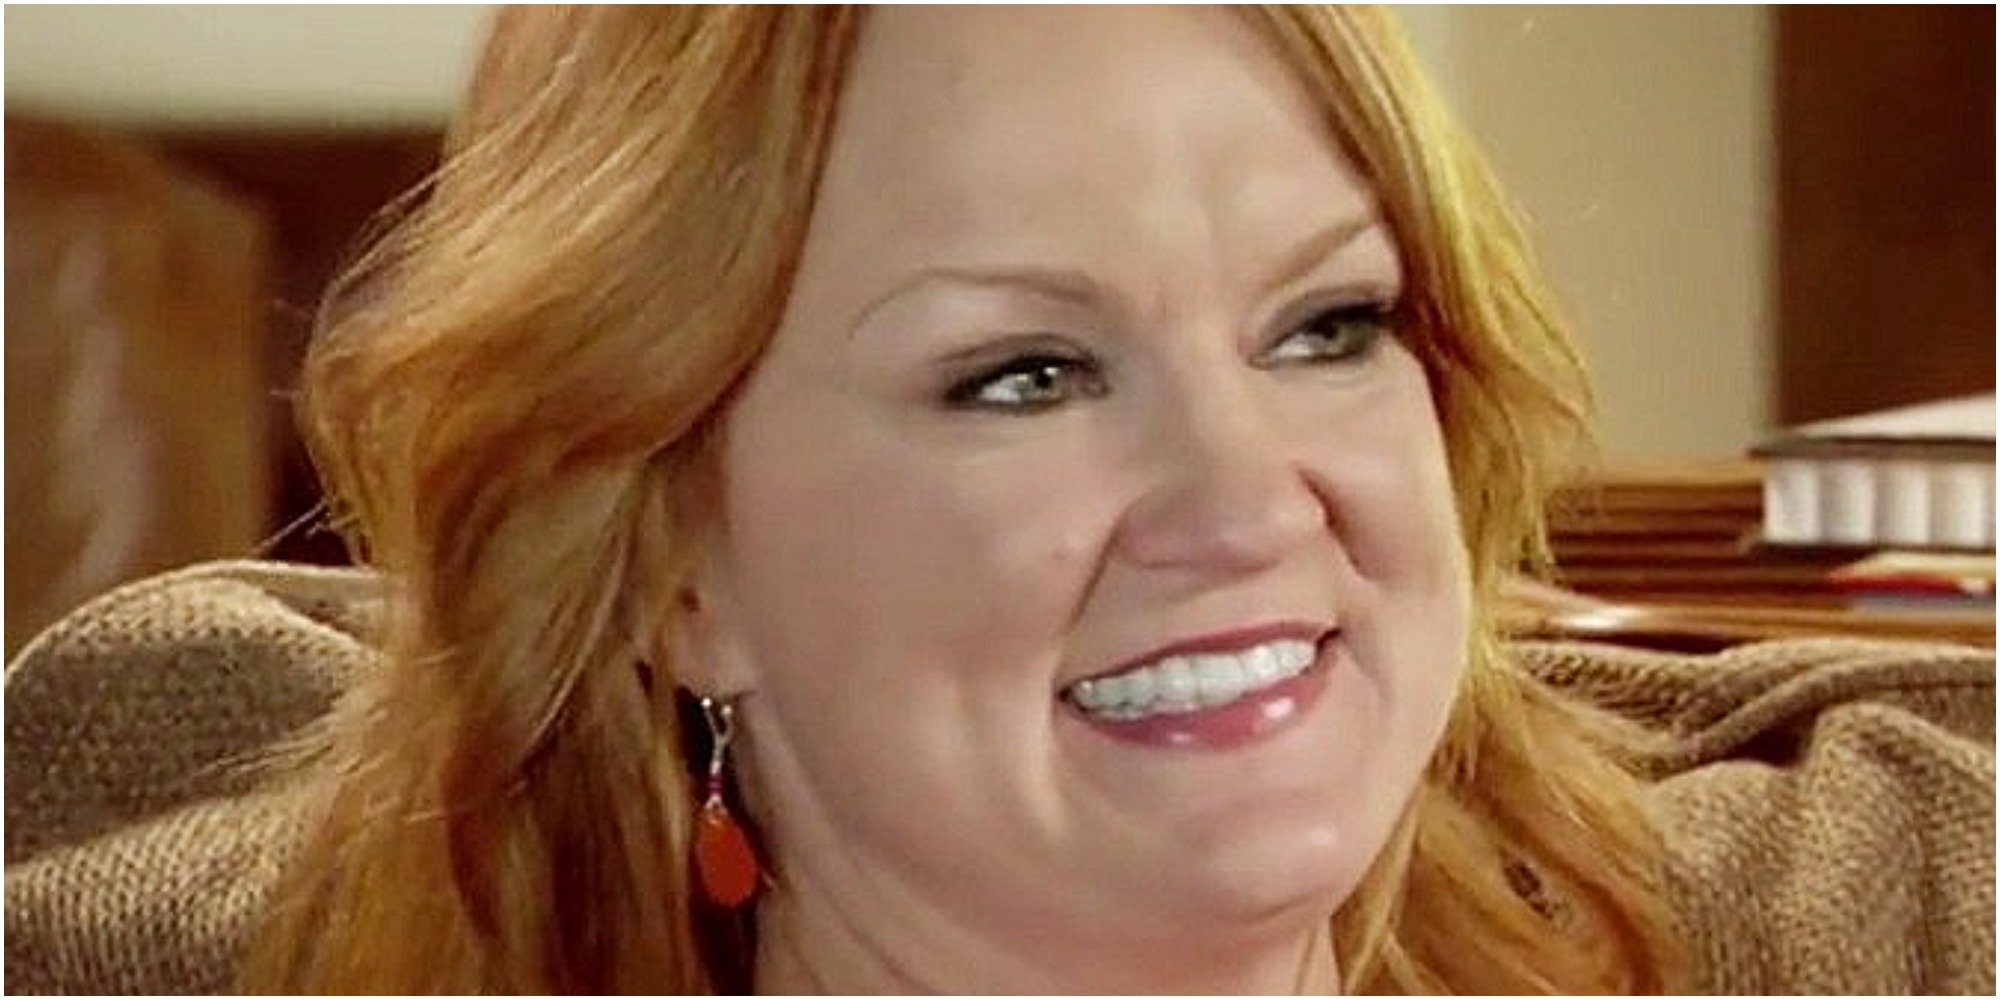 ‘The Pioneer Woman’: Ree Drummond’s 15-Minute Pancetta and Leek Pasta Dish ‘Will Make Your Skirt Fly Up’